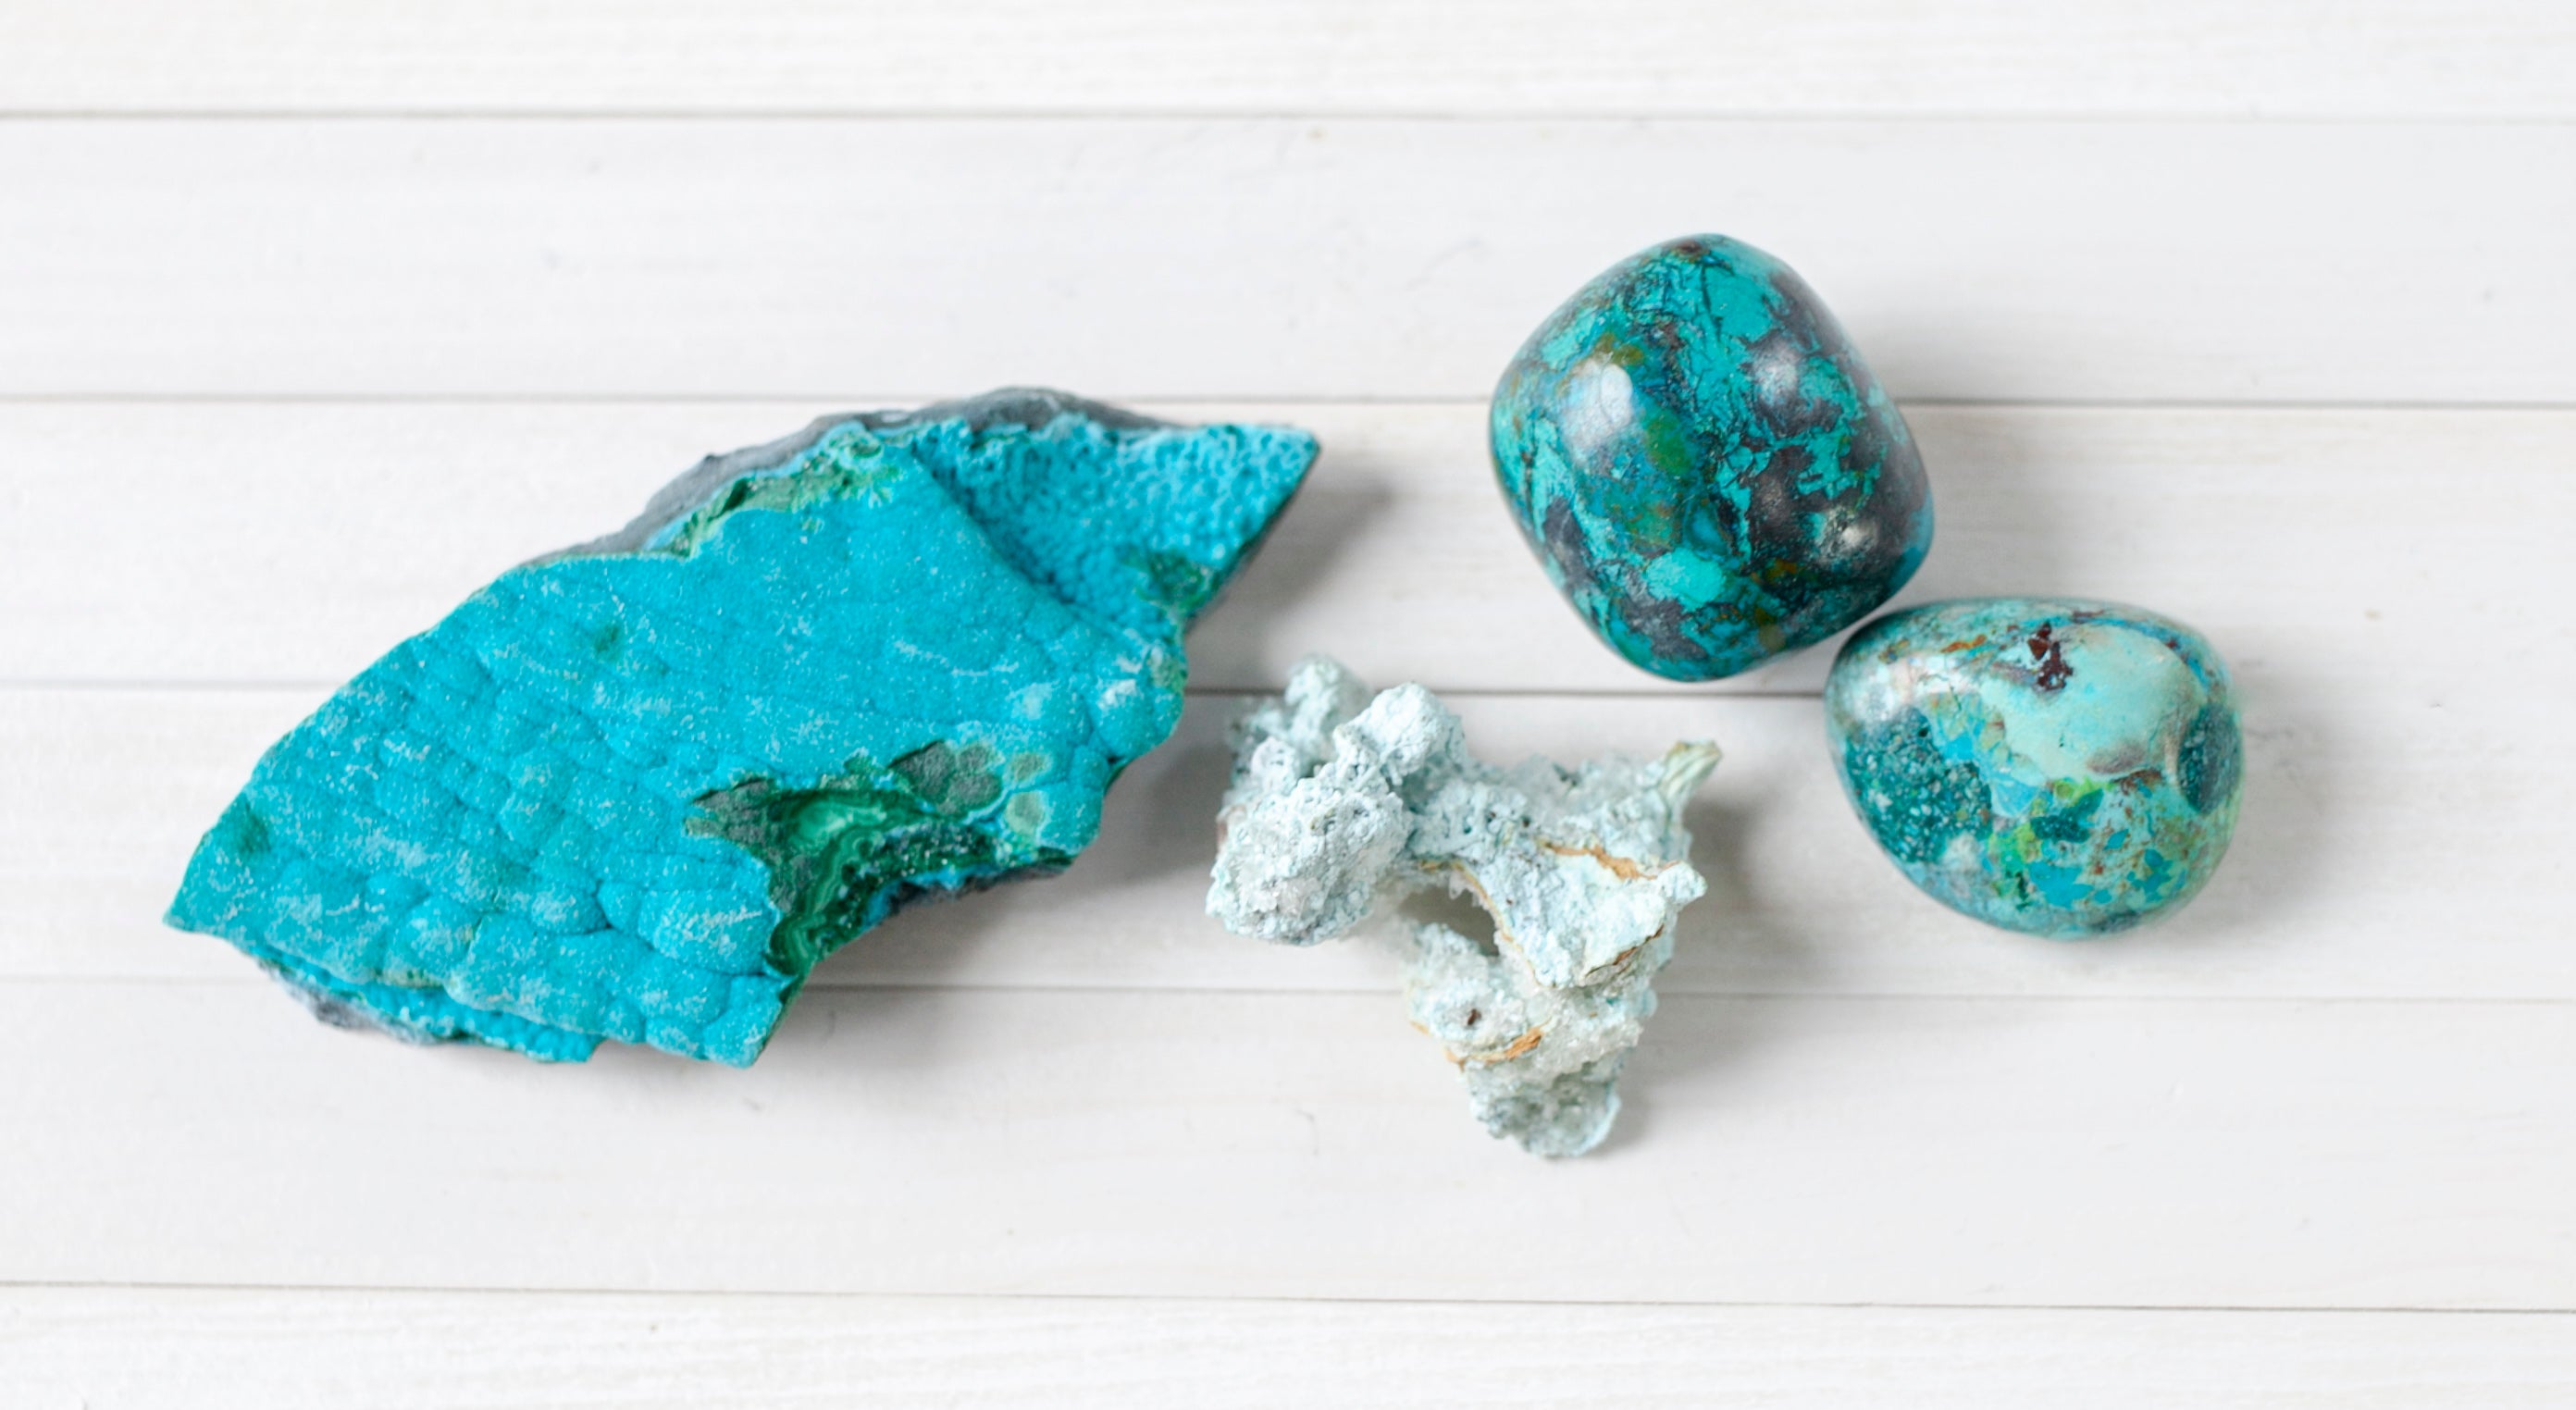 Raw and tumbled Chrysocolla. Chrysocolla is a unique mineral with vibrant teal color.